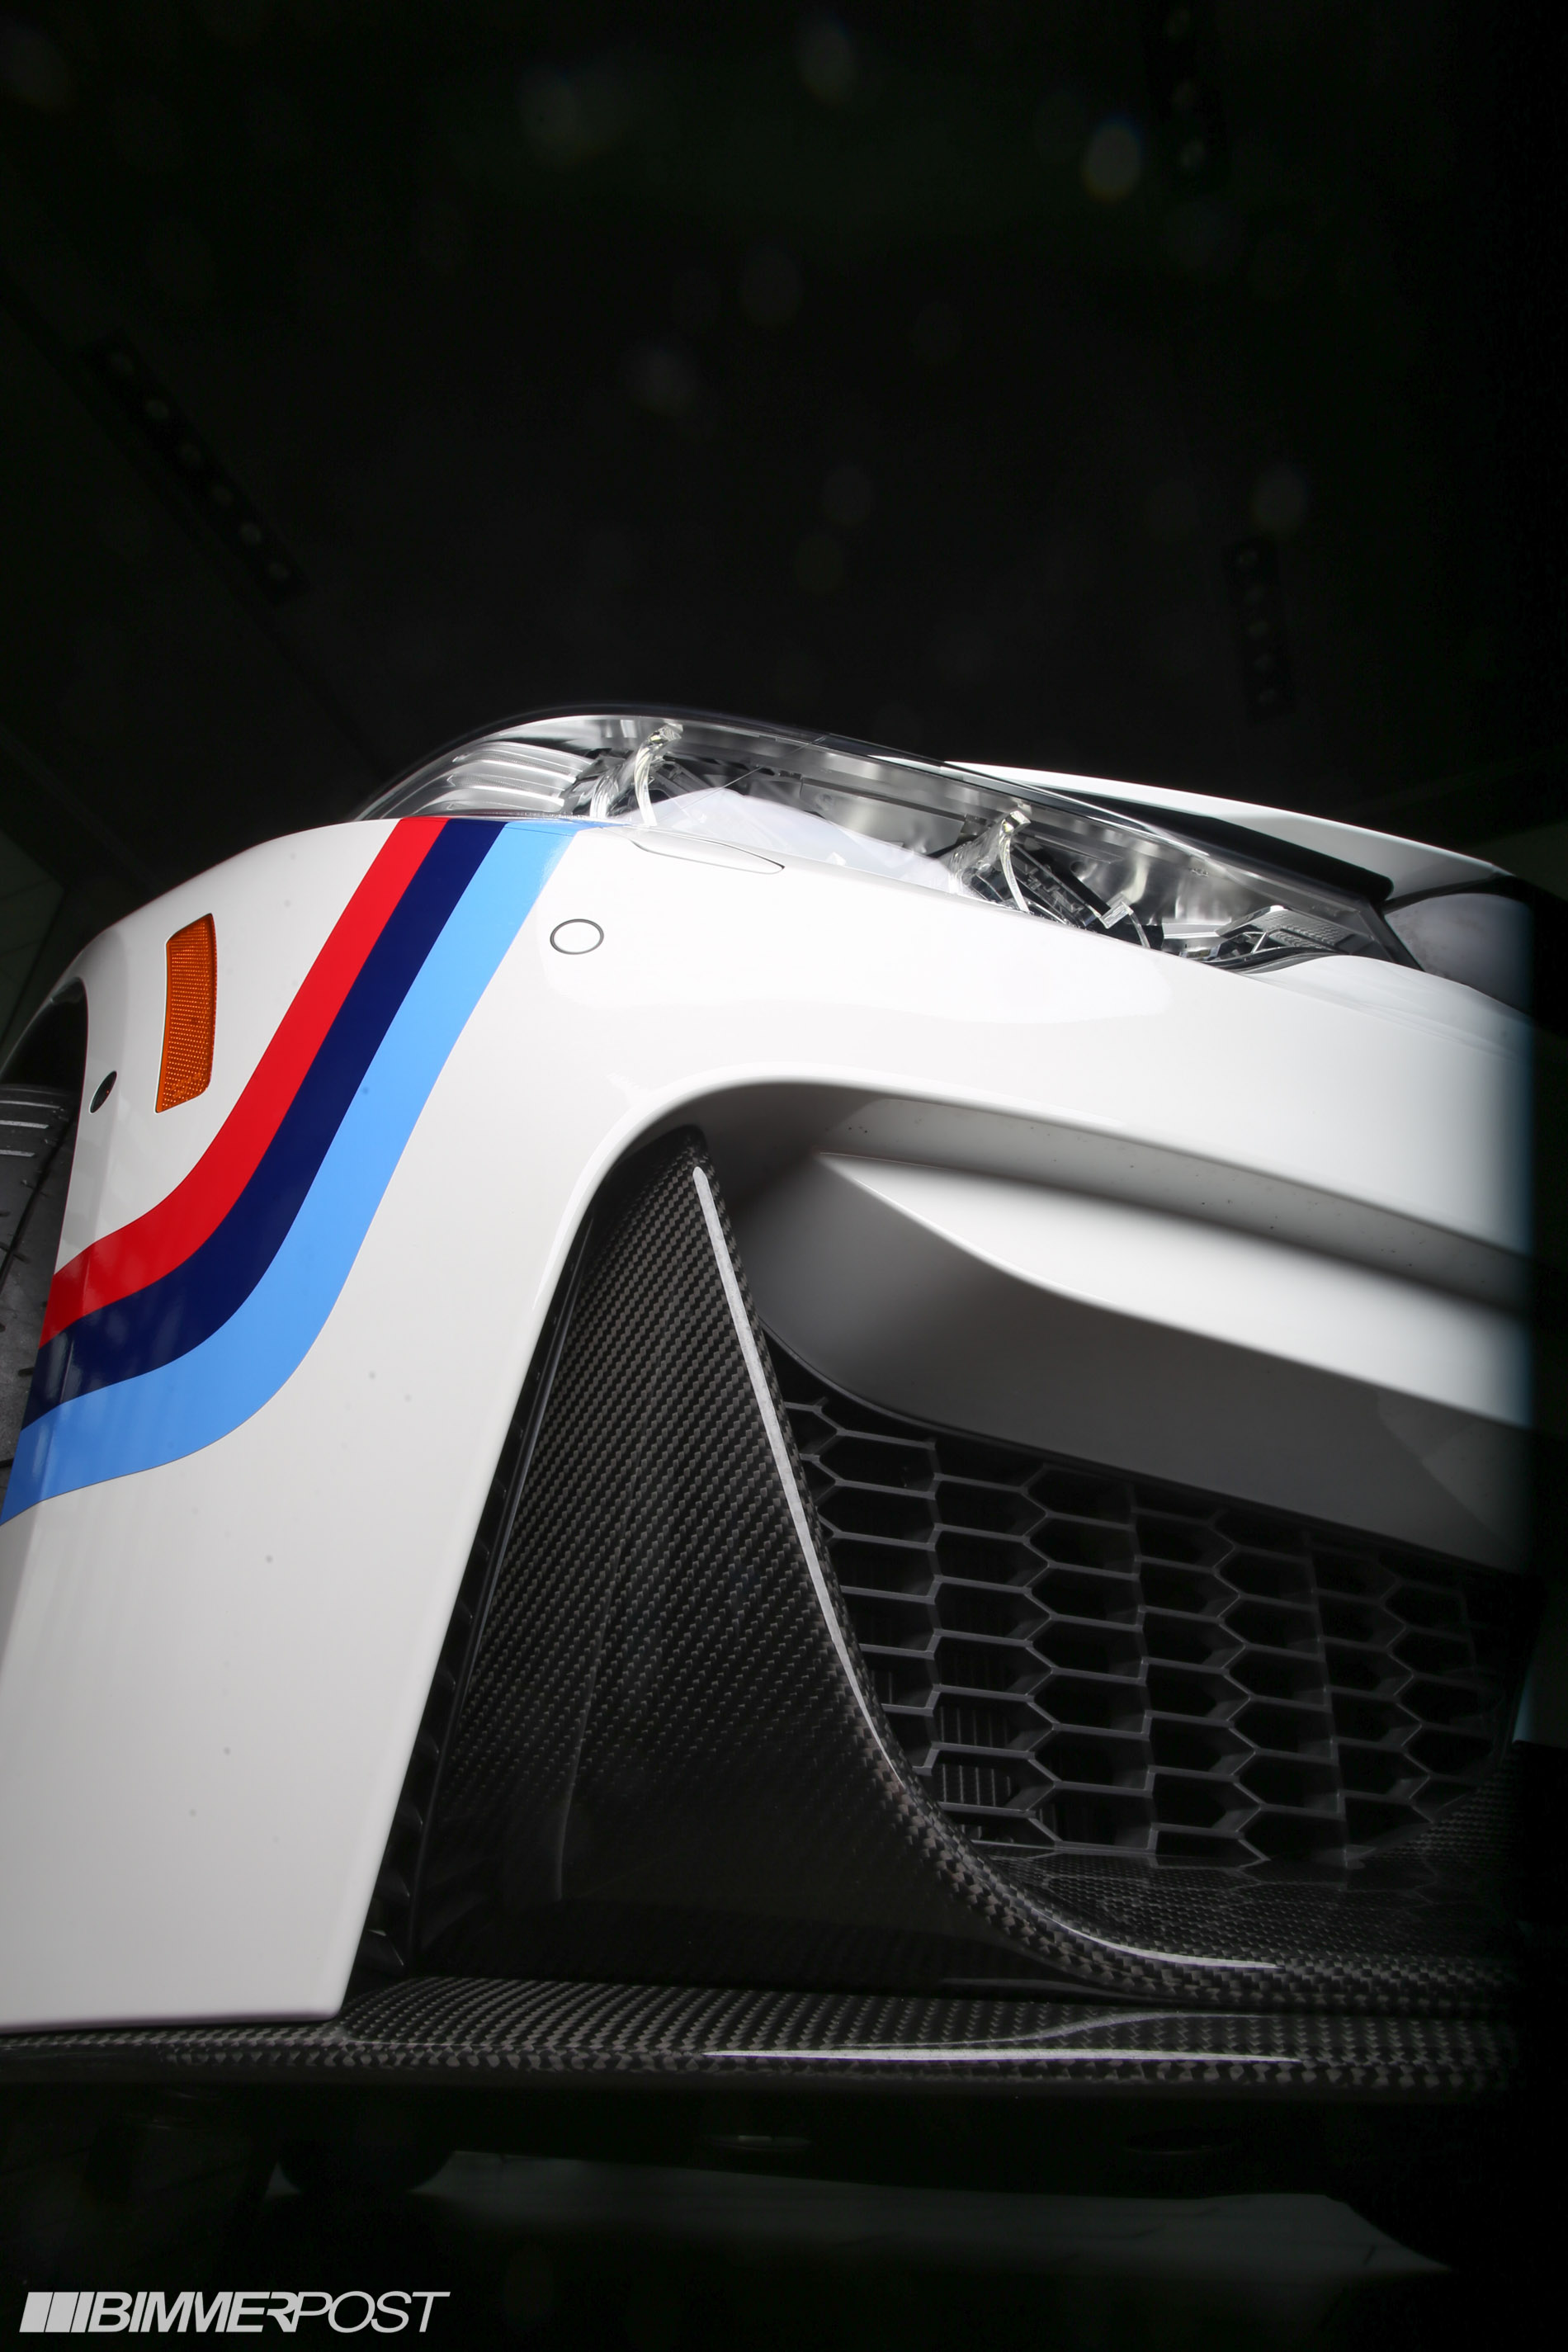 BMW M Performance Parts and Original BMW Accessories Revealed for 